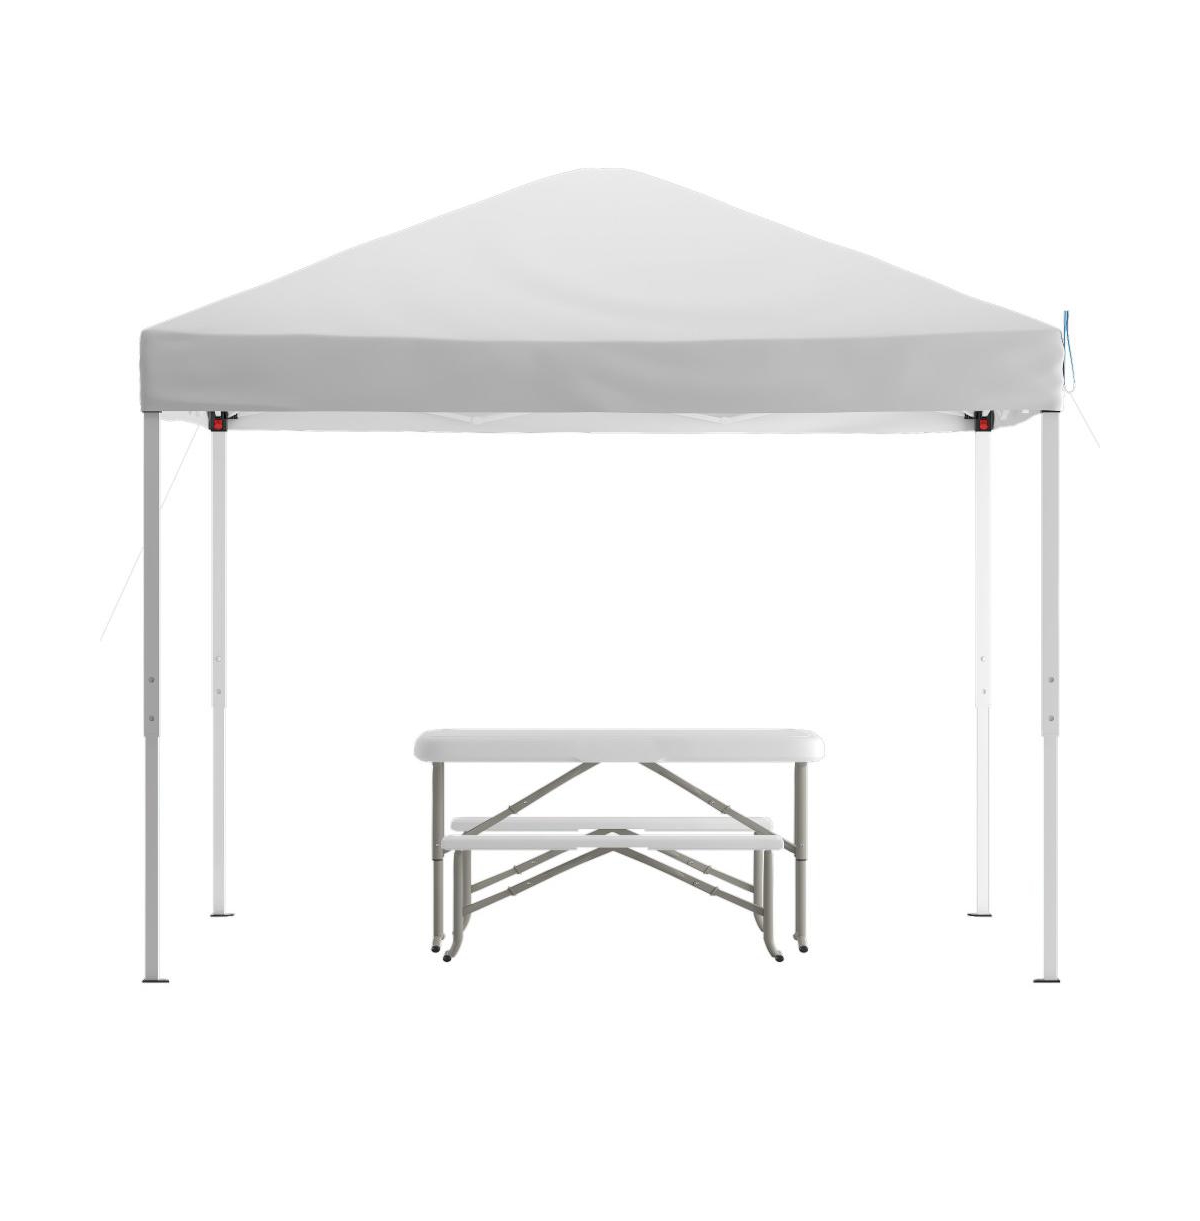 Portable Tailgate, Camping Or Event Set With White Pop Up Event Canopy Tent With Carry Bag And Folding Table With Benches Set - White